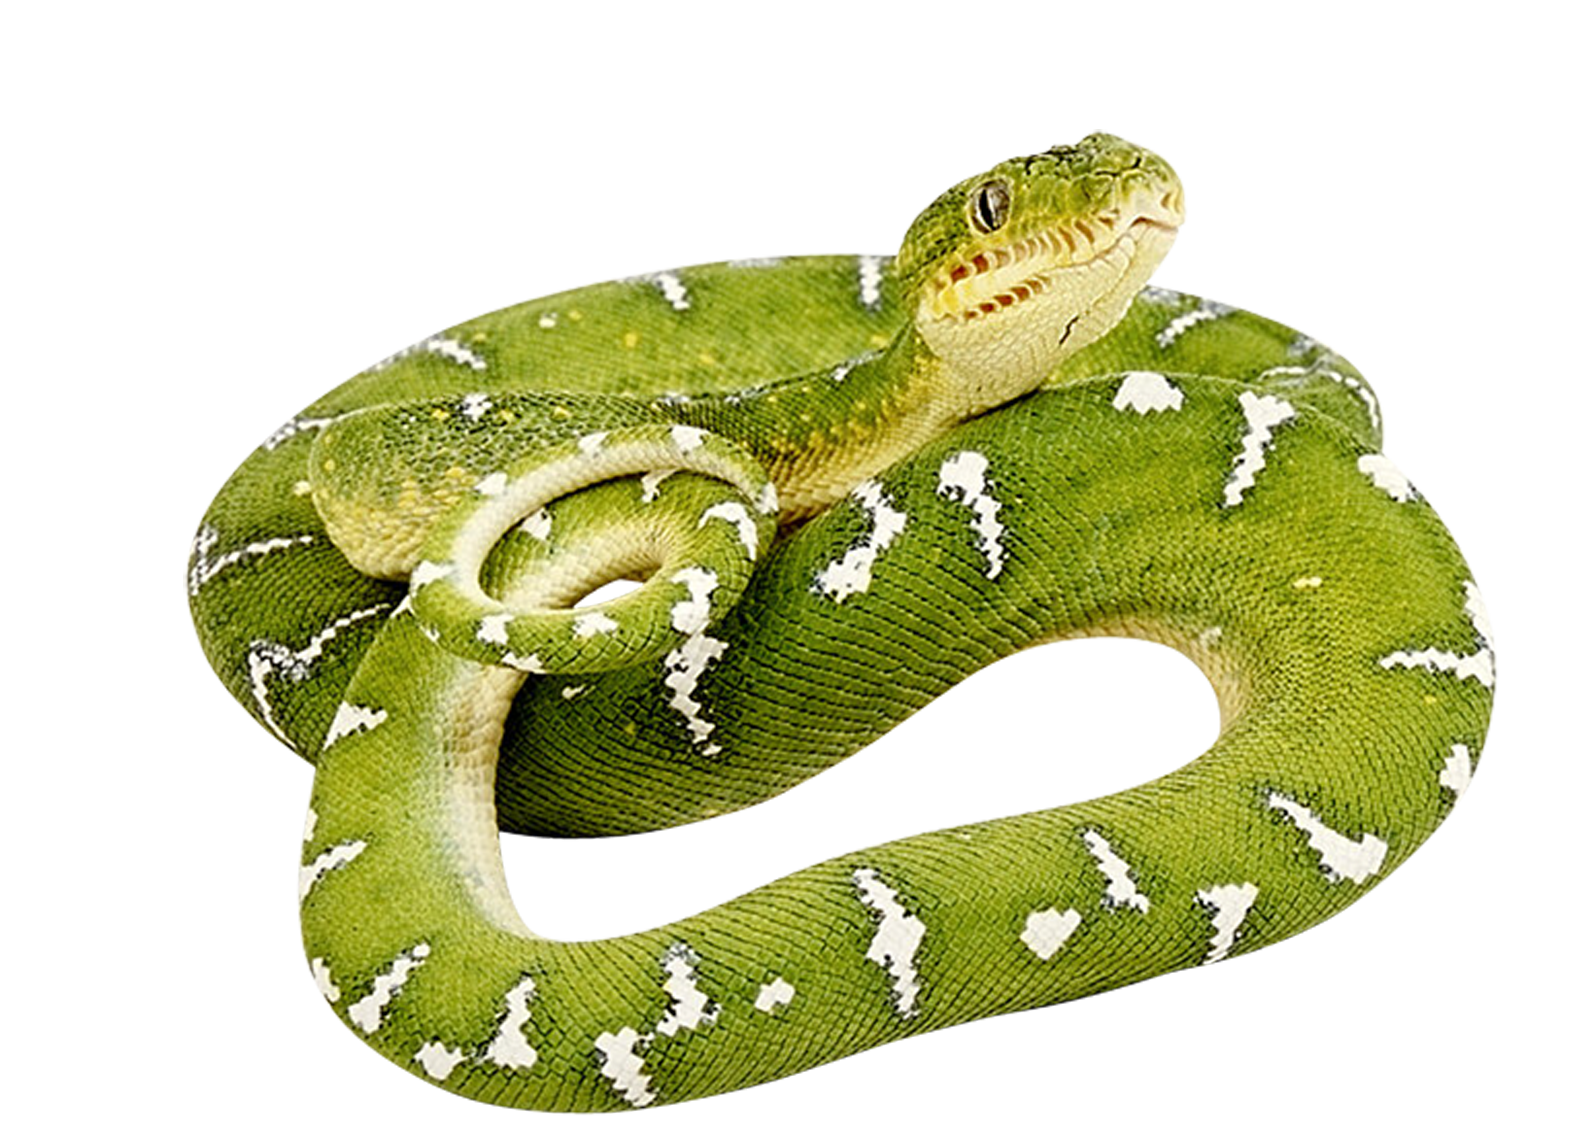 Snake clipart snack. Png image free download